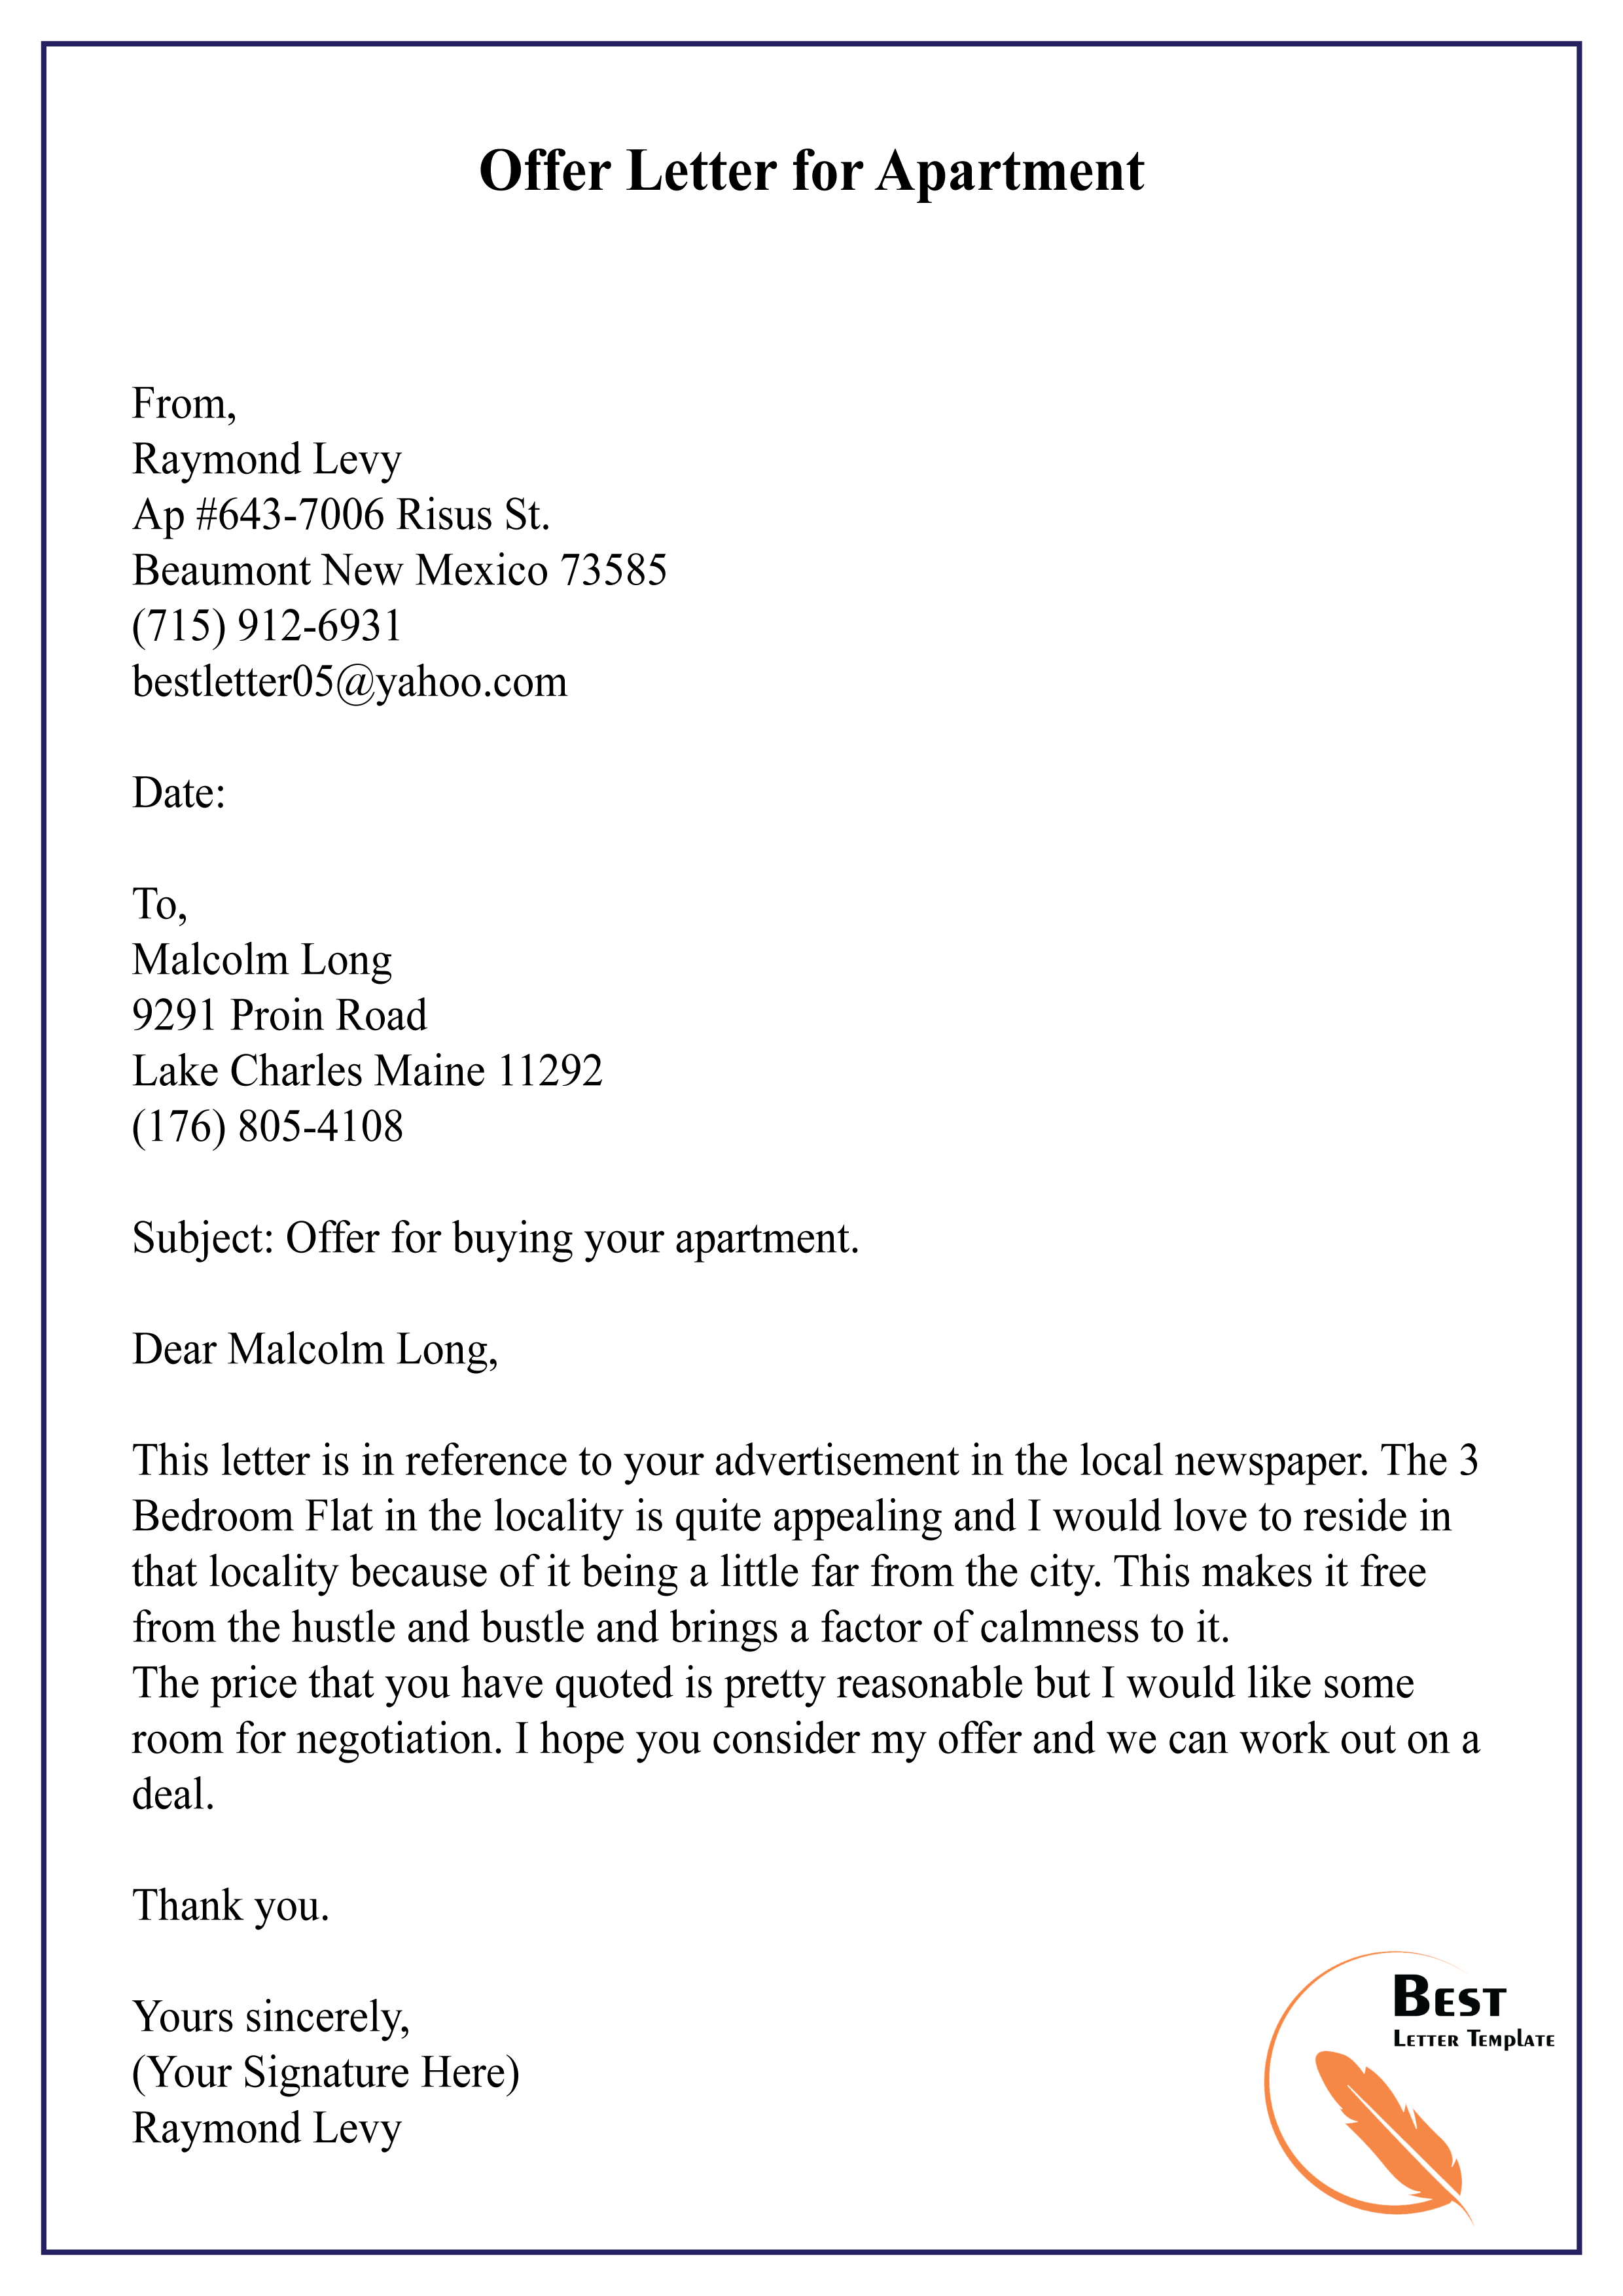 Offer Letter Template For Apartment Rental